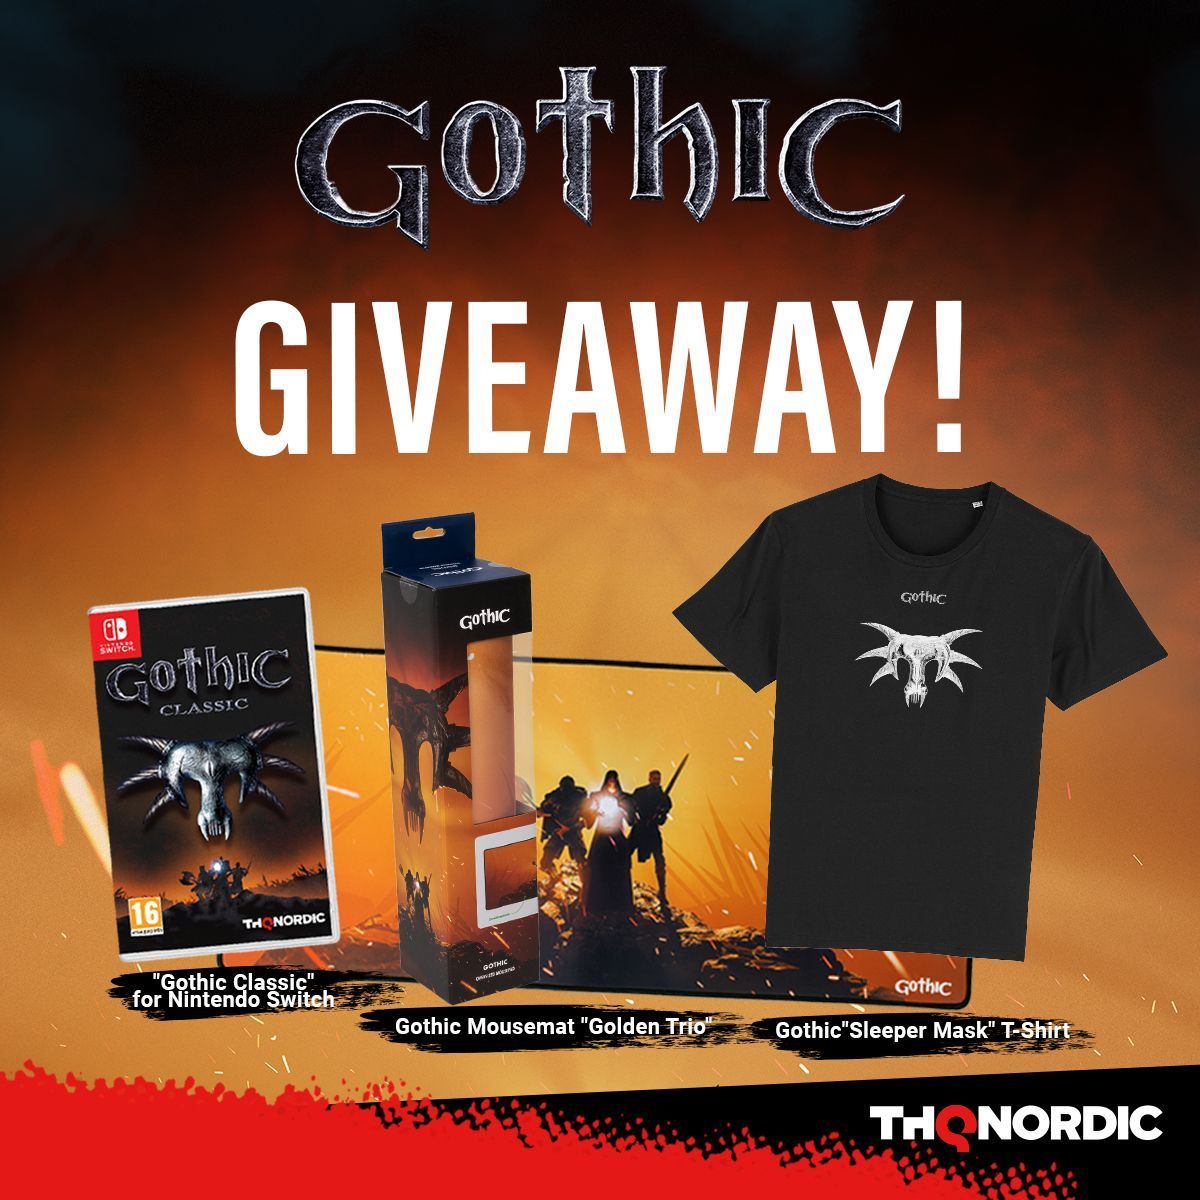 Win the #Gothic Classic for the Nintendo Switch, the Gothic Mousemat & T-Shirt all together! To enter: RETWEET this post & follow: @thqnstoreEU & @weareitemlab #Giveaway closes on 28/11/23 23.59 GMT For EU addresses only. Full T&Cs at buff.ly/3S2w0W6 #THQNordic